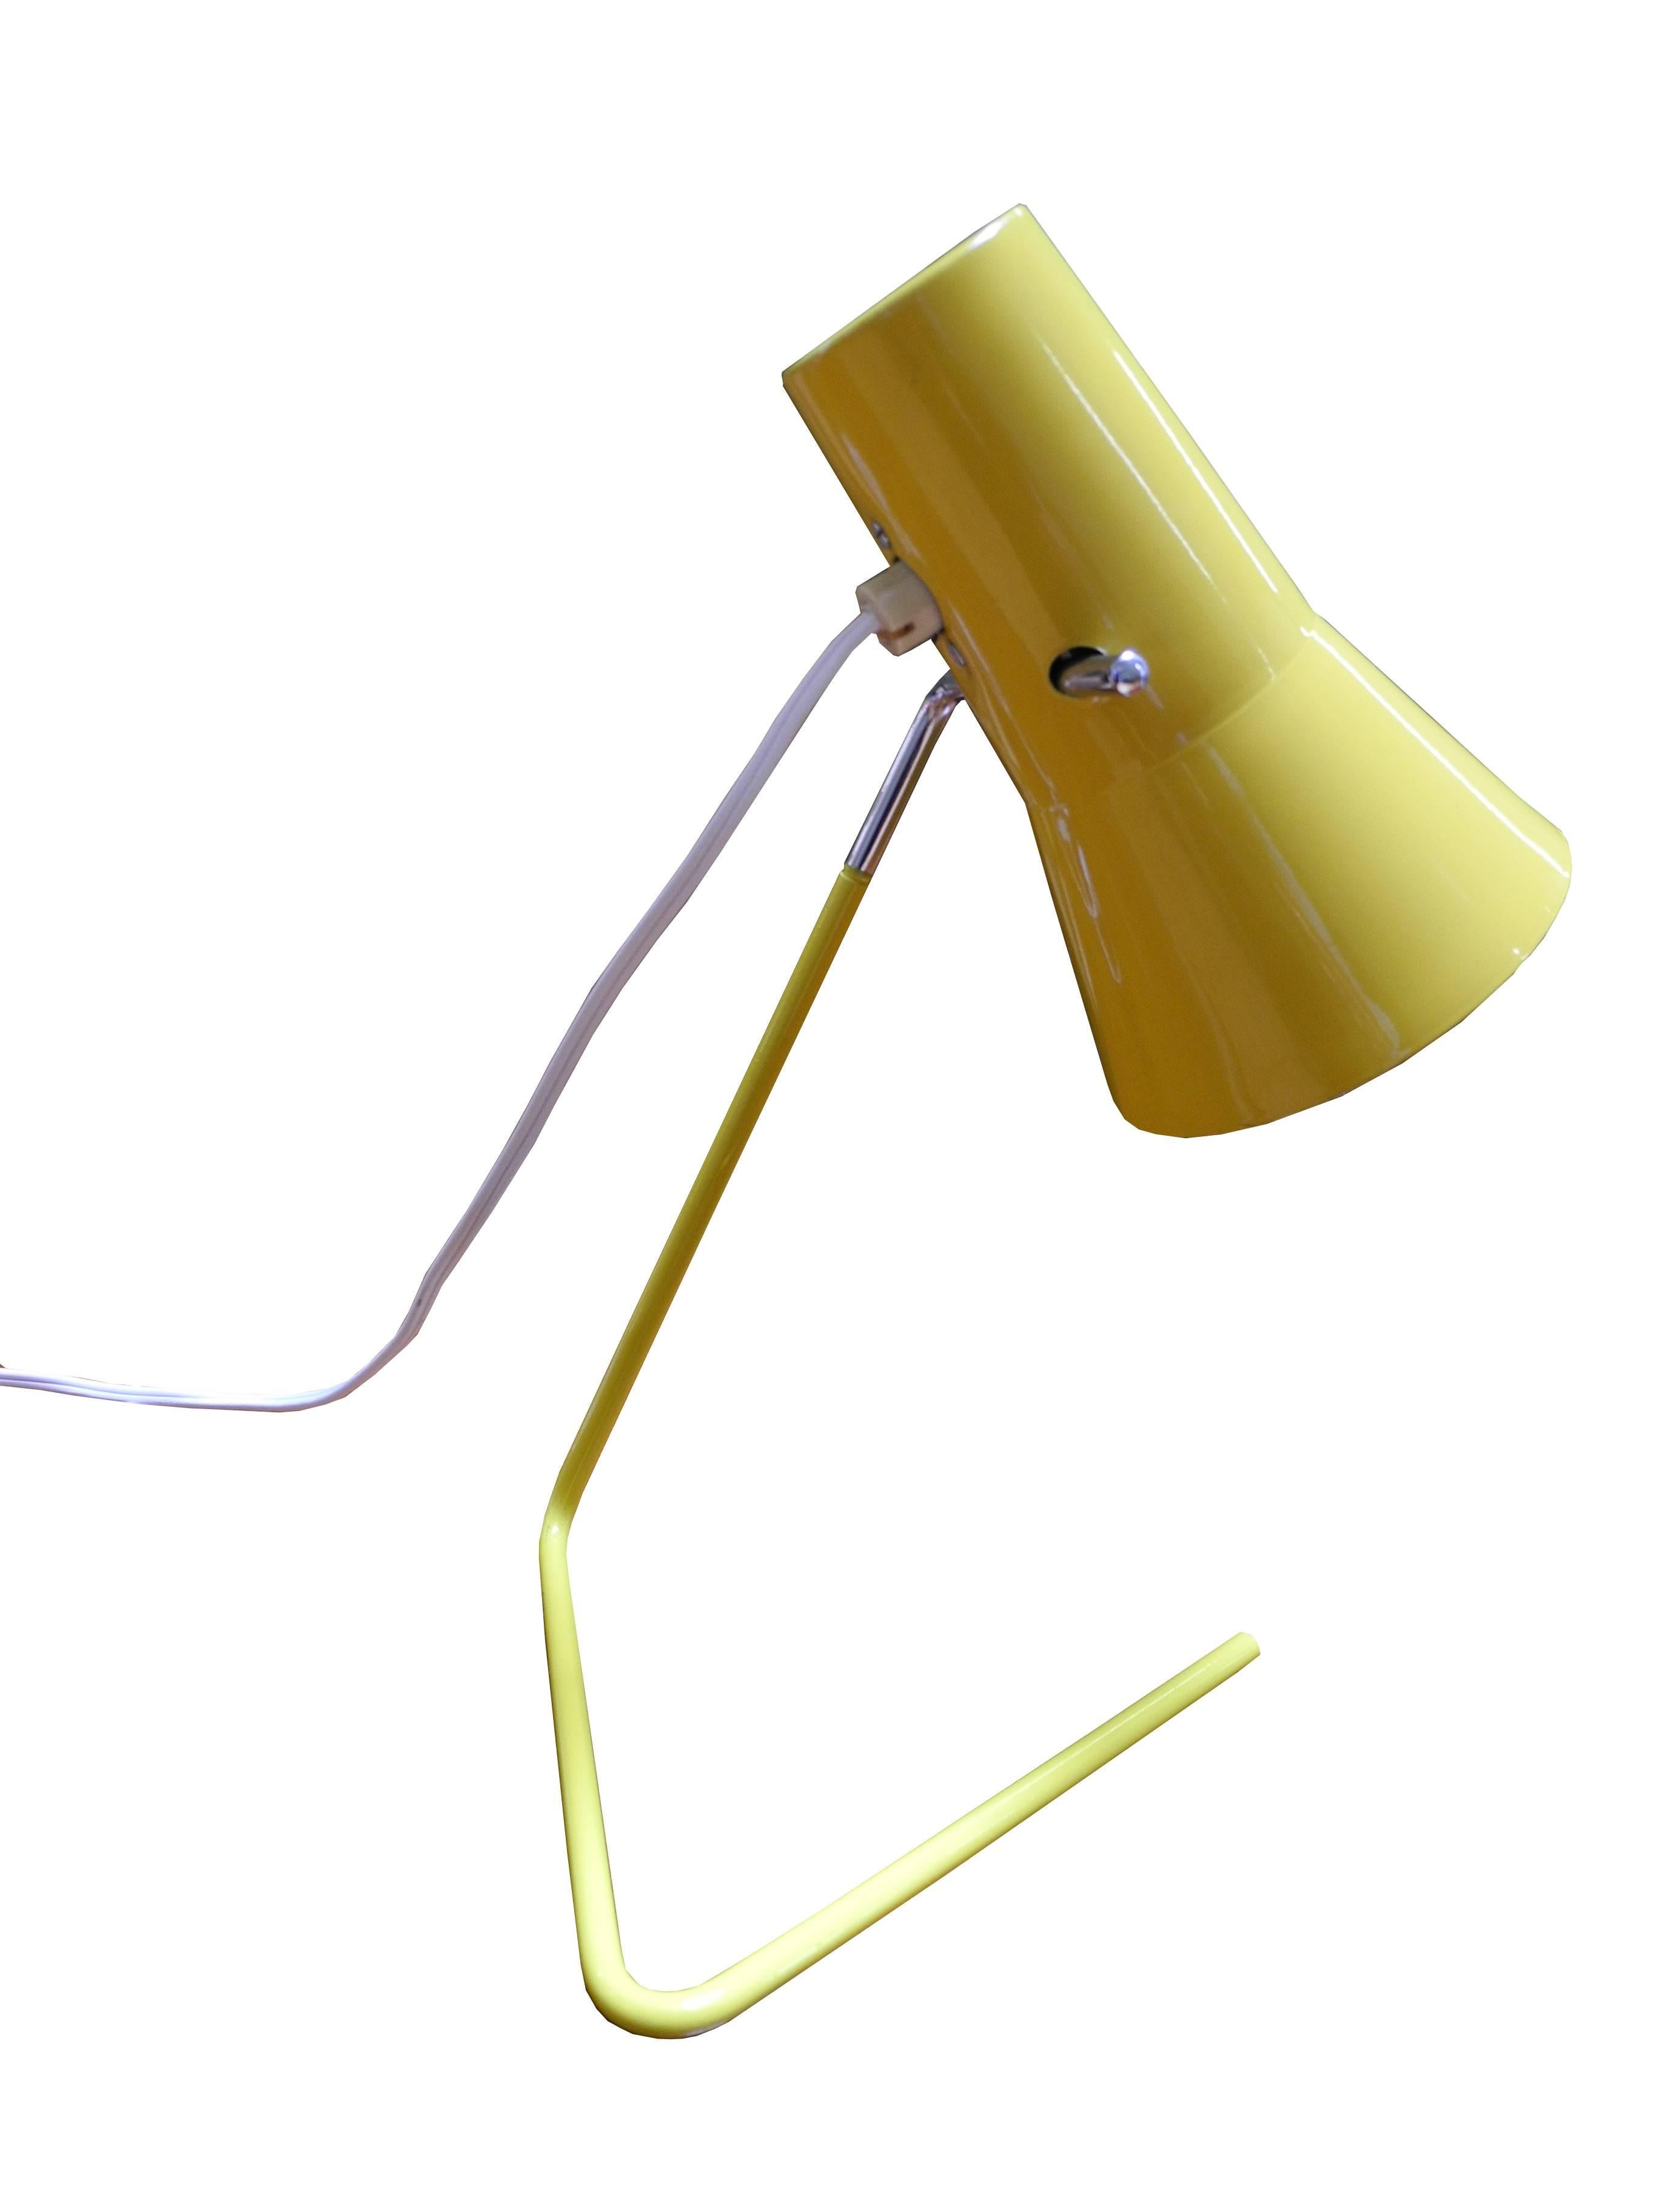 This modern Bauhaus lamp by Josef Hurka for Drupol is from the Czech Republic. It can be used as a bedside lamp or little desk lamp. There is an orange one available but sold separately.